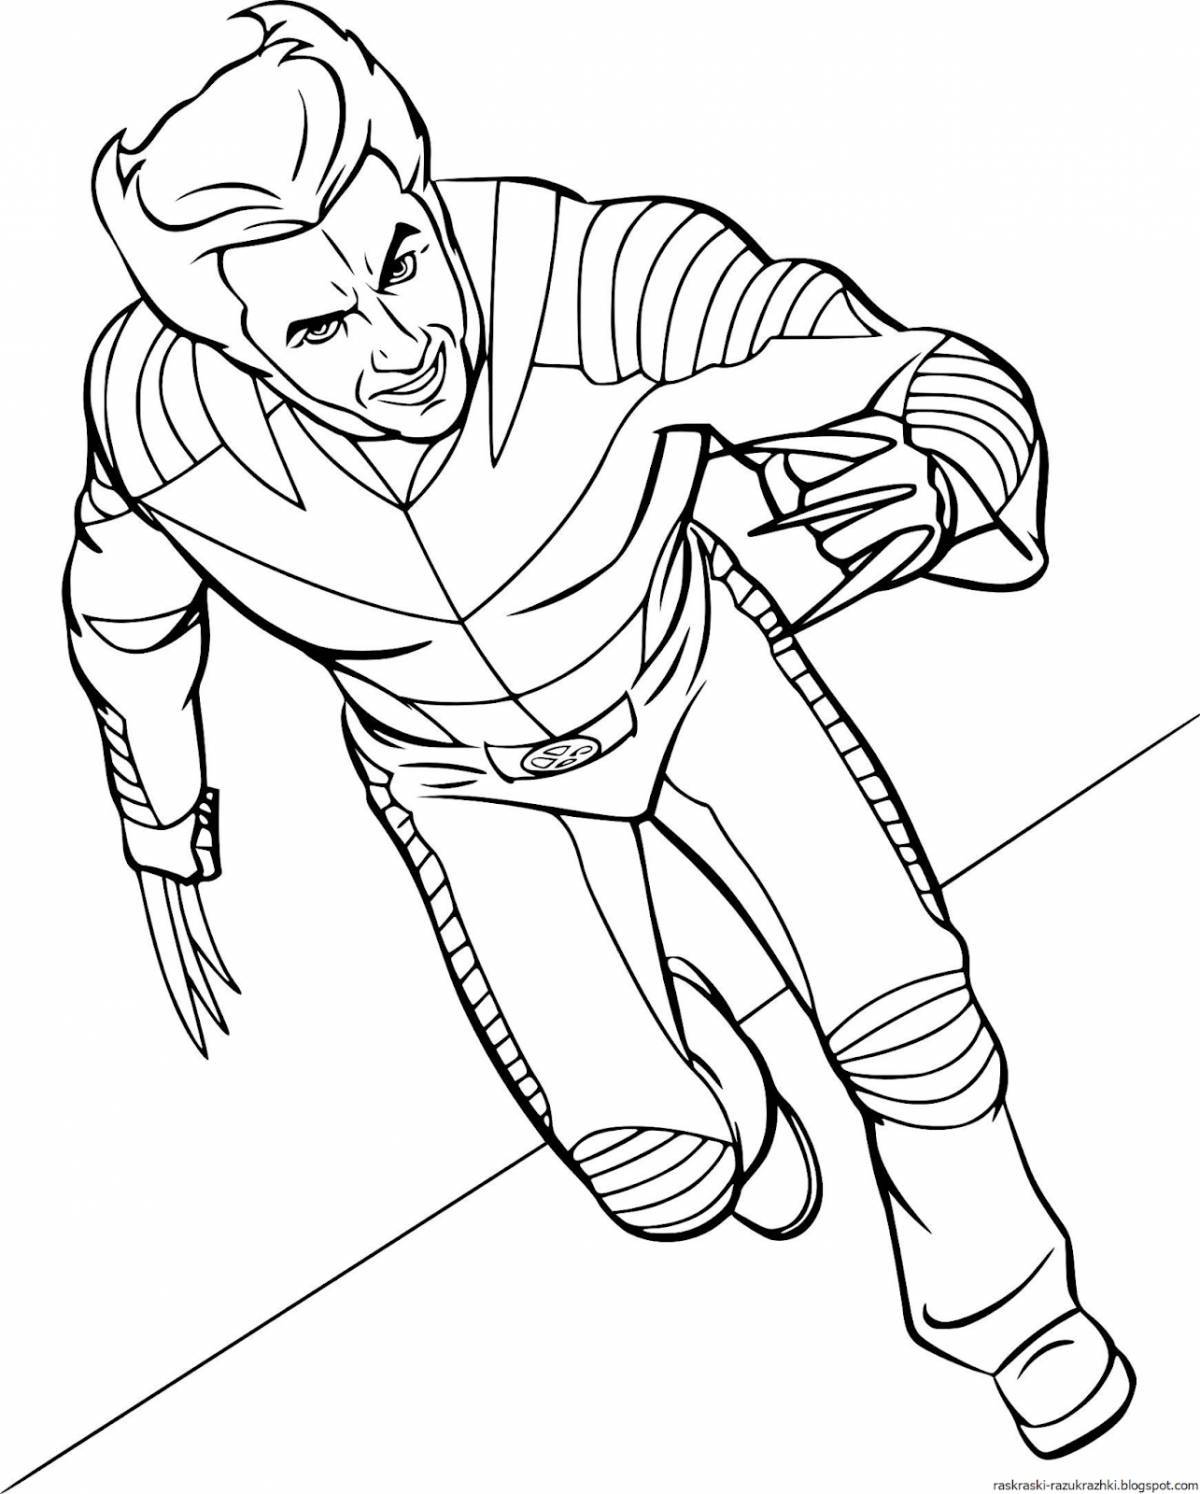 Colorful superhero coloring pages for boys